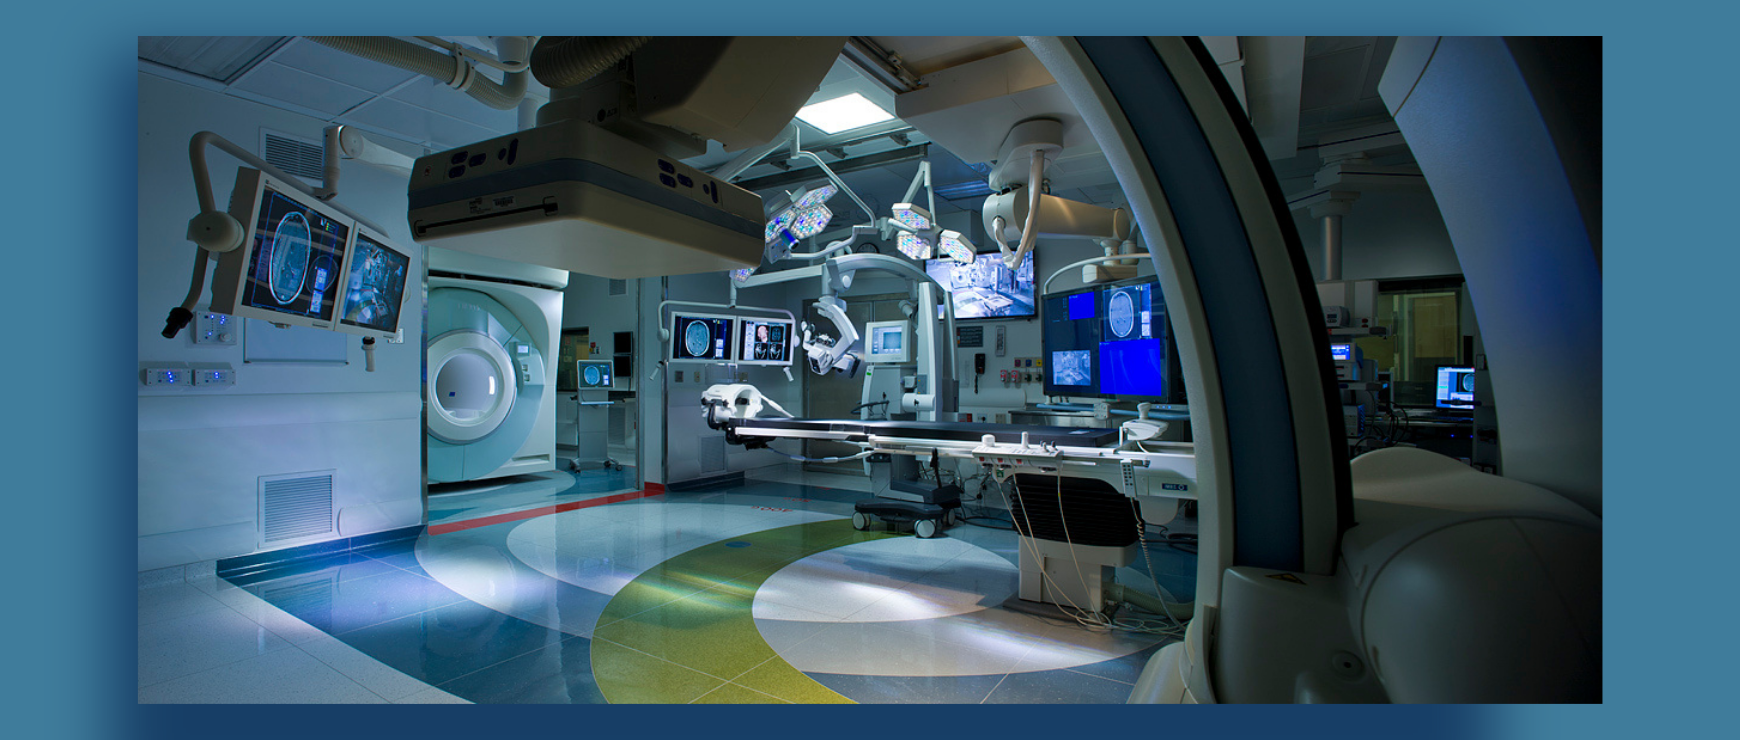 Image from Brigham & Women's Hospital State of the Art Surgical Suite